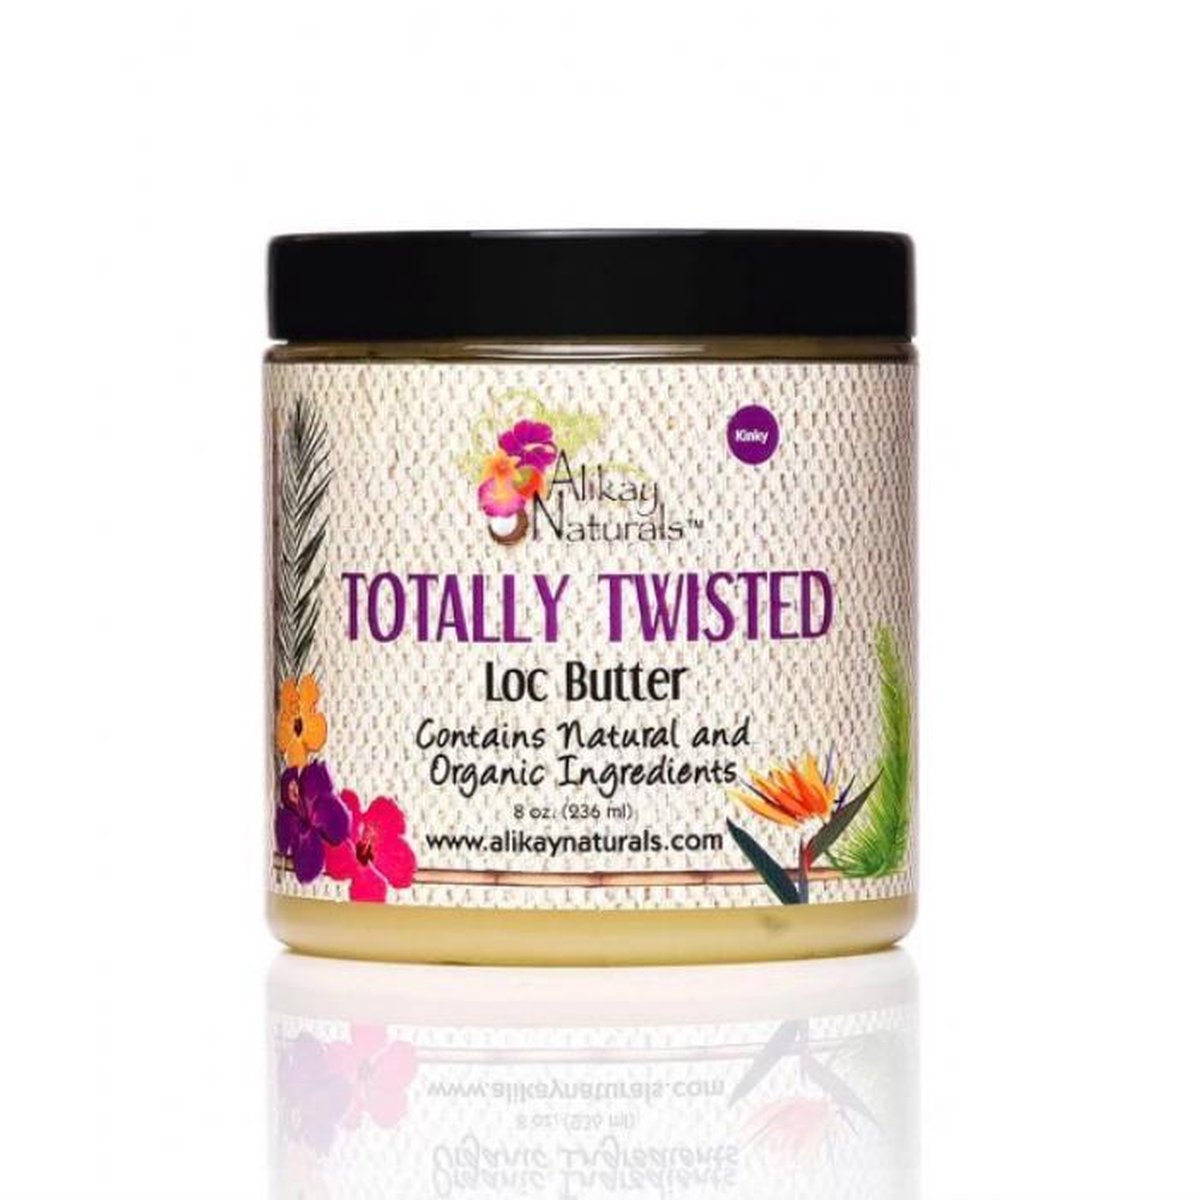 Alikay Naturals Totally Twisted Loc Butter 236ml